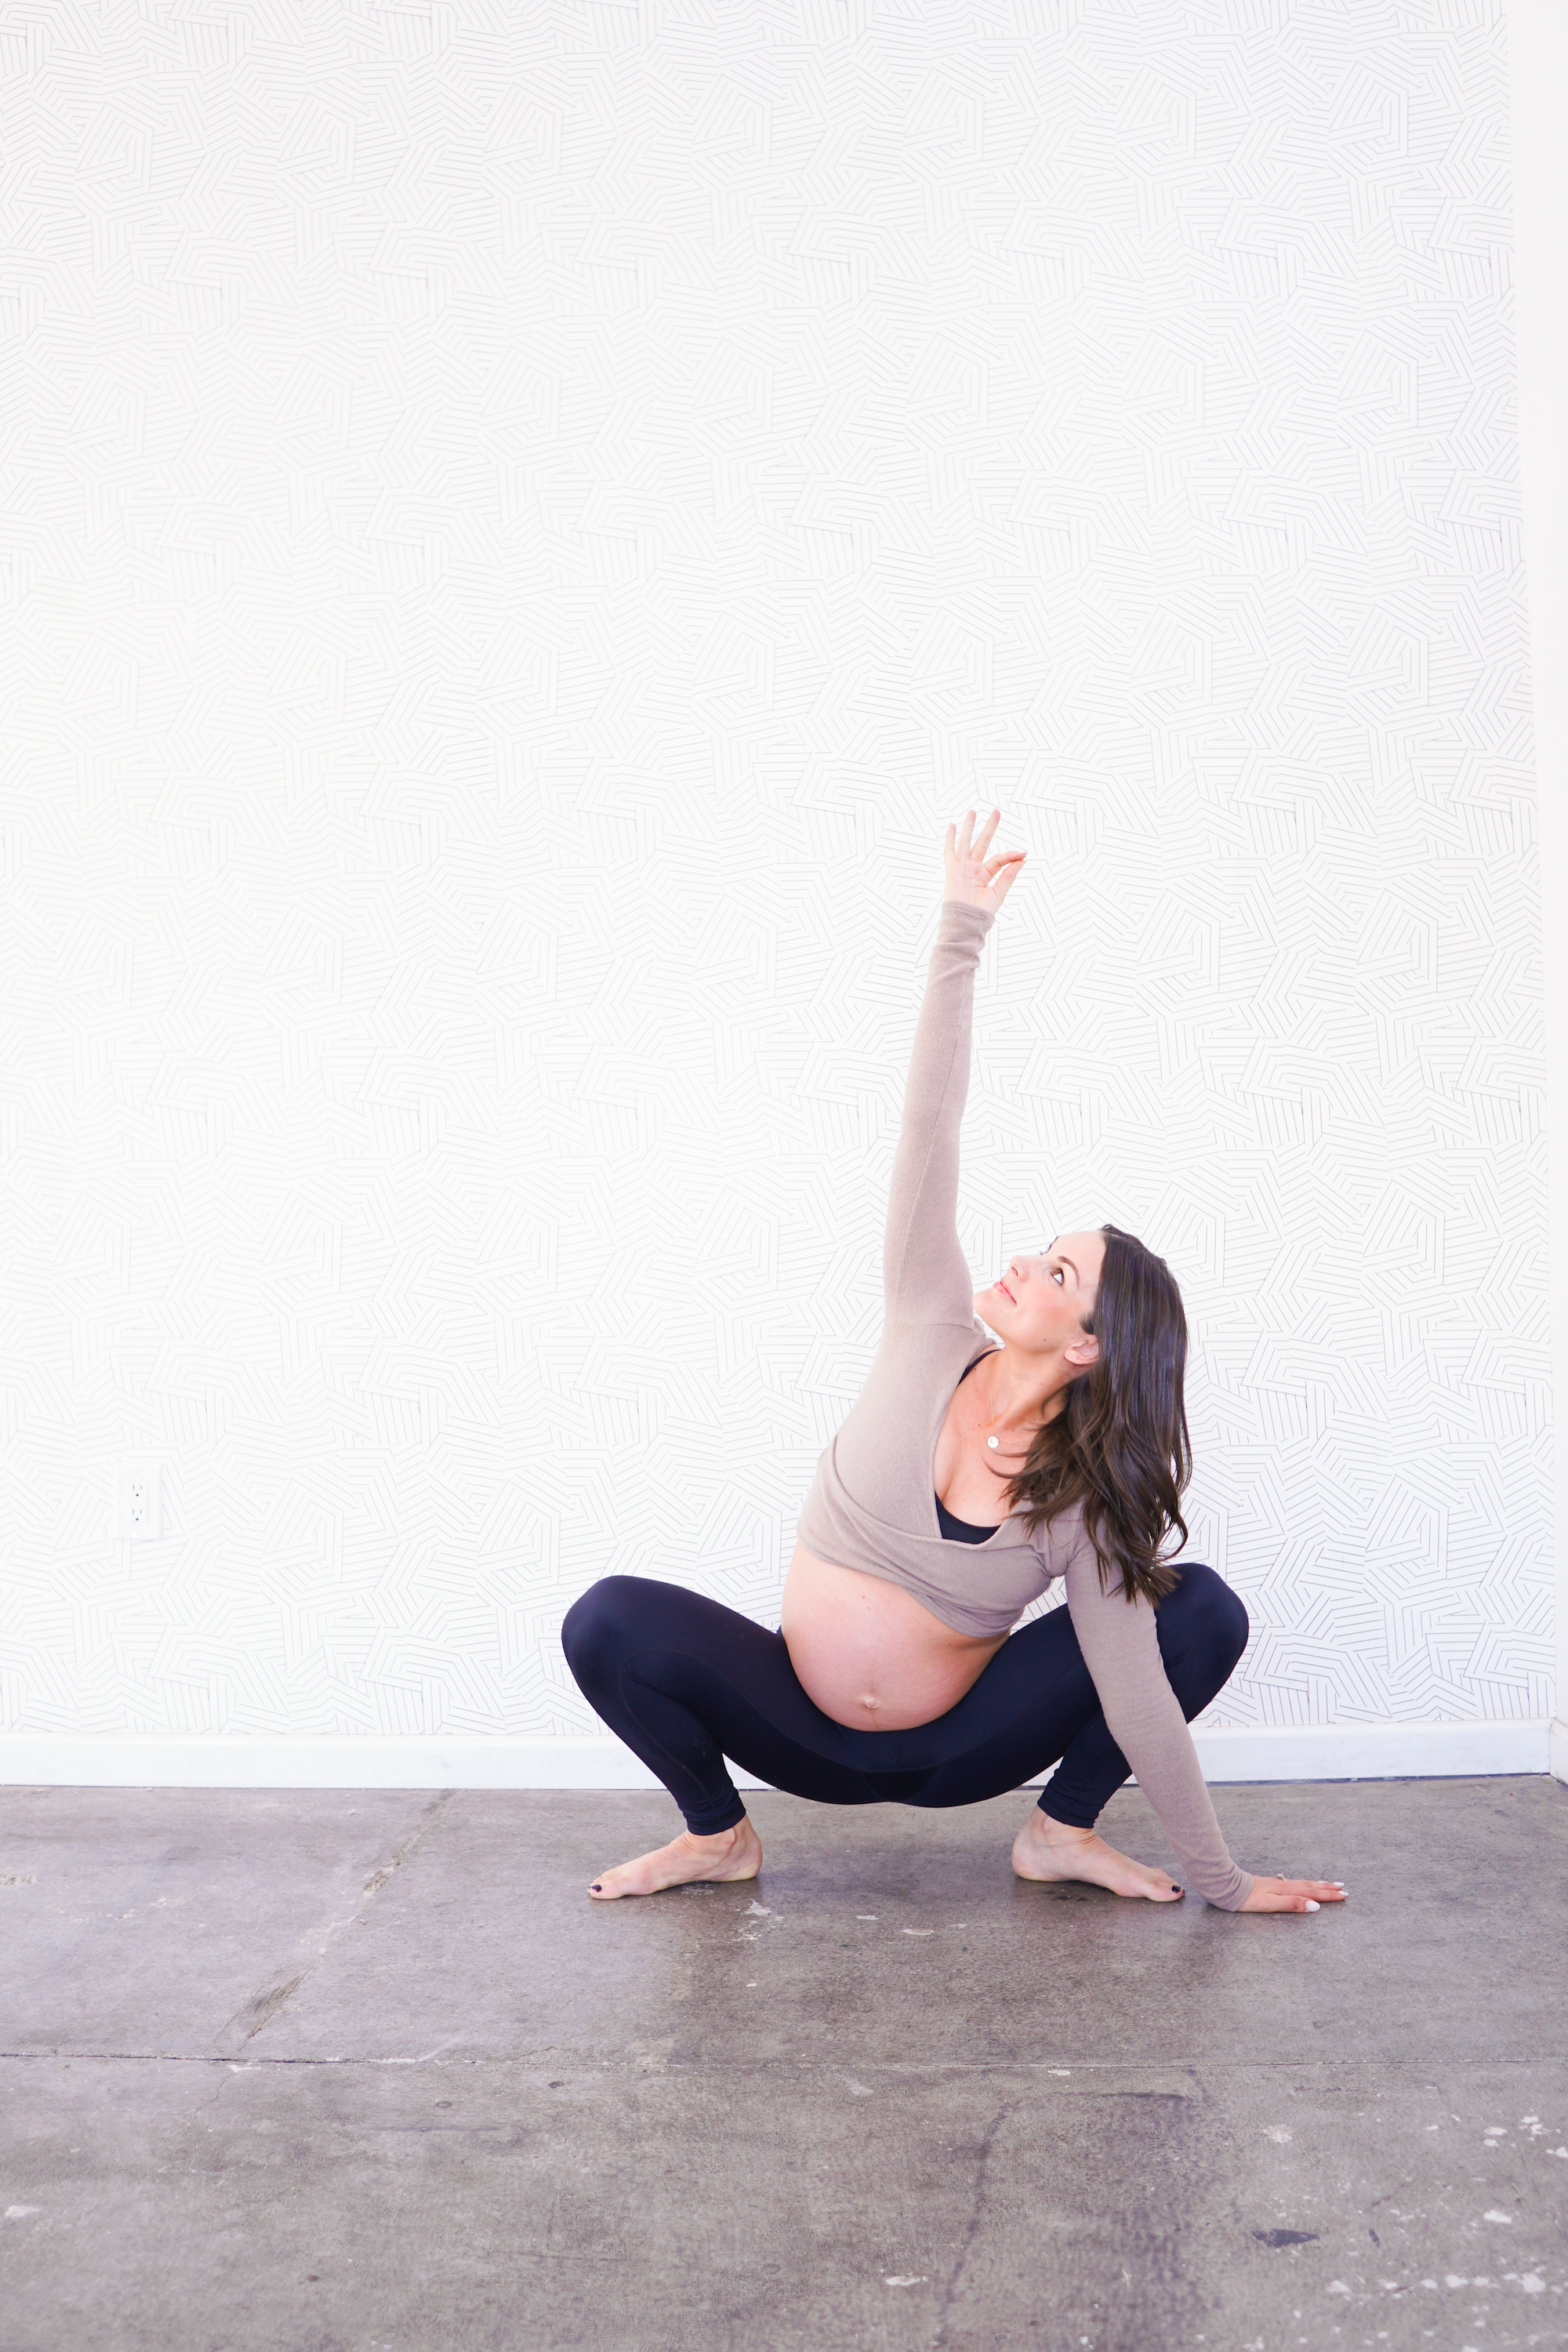 What Are the 4 Prenatal Yoga Poses That Can Benefit Pregnant Women